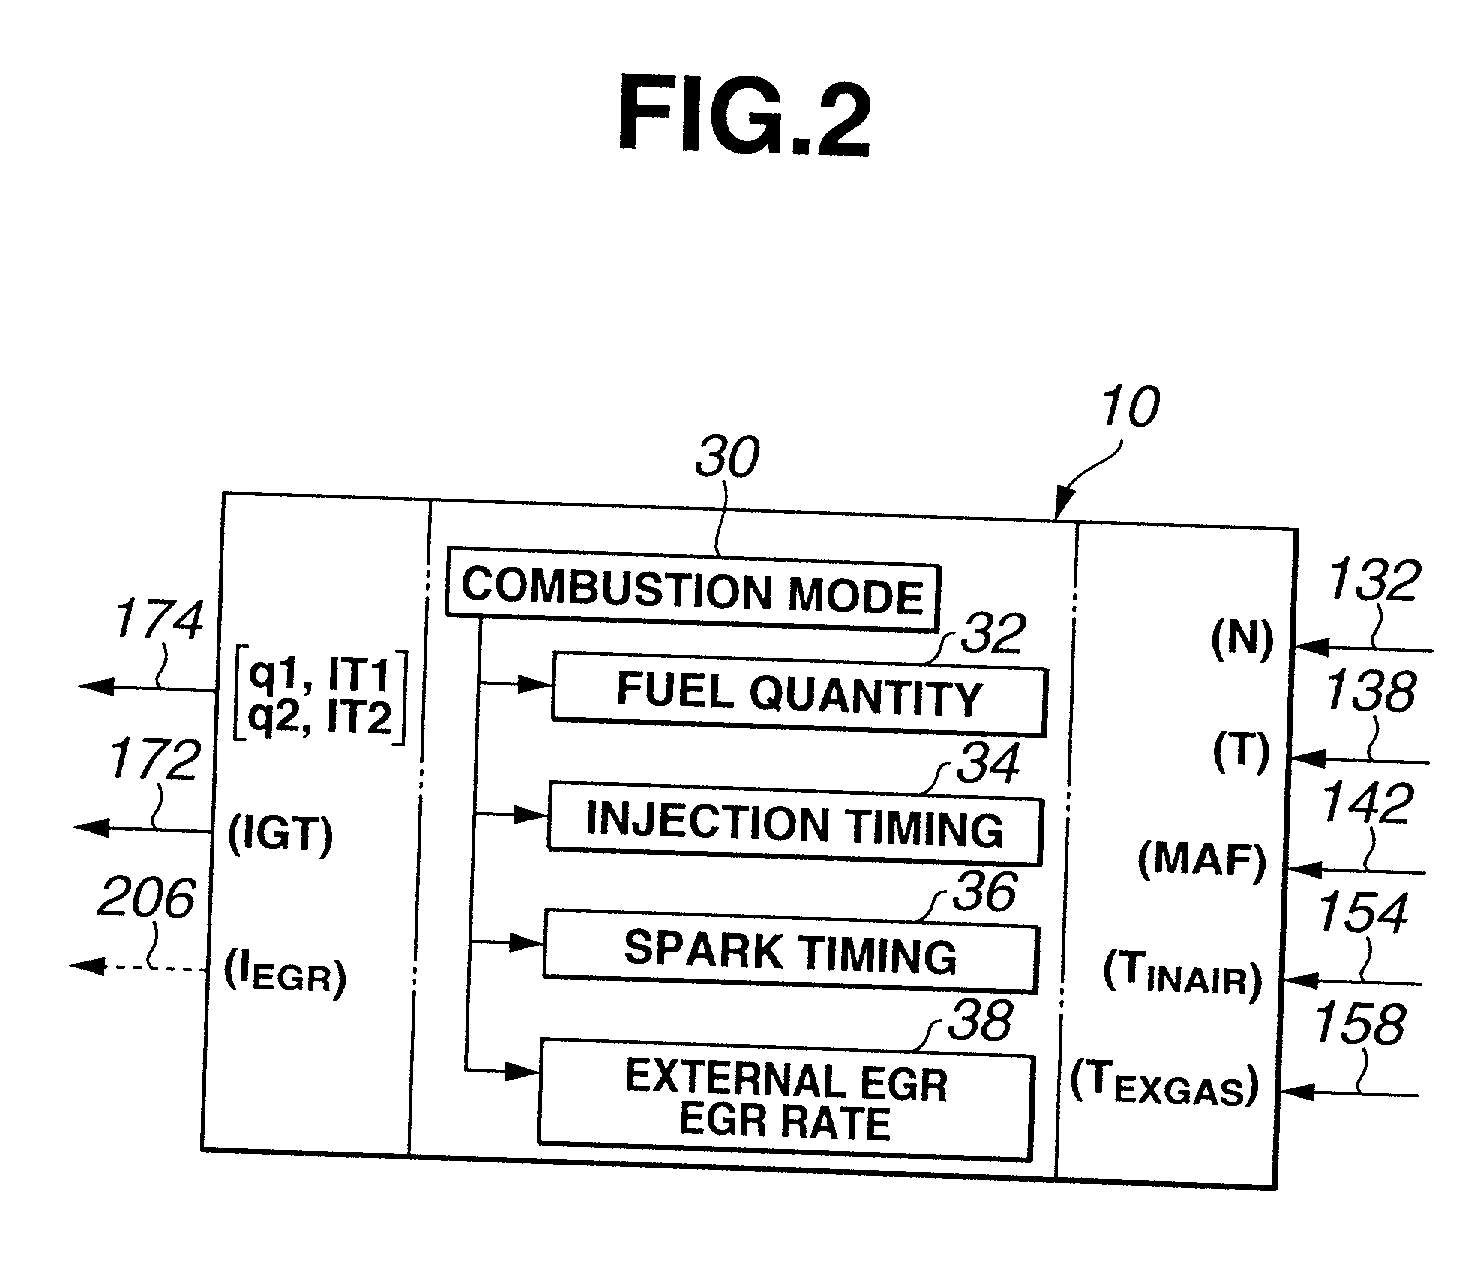 System and method for enhanced combustion control in an internal combustion engine